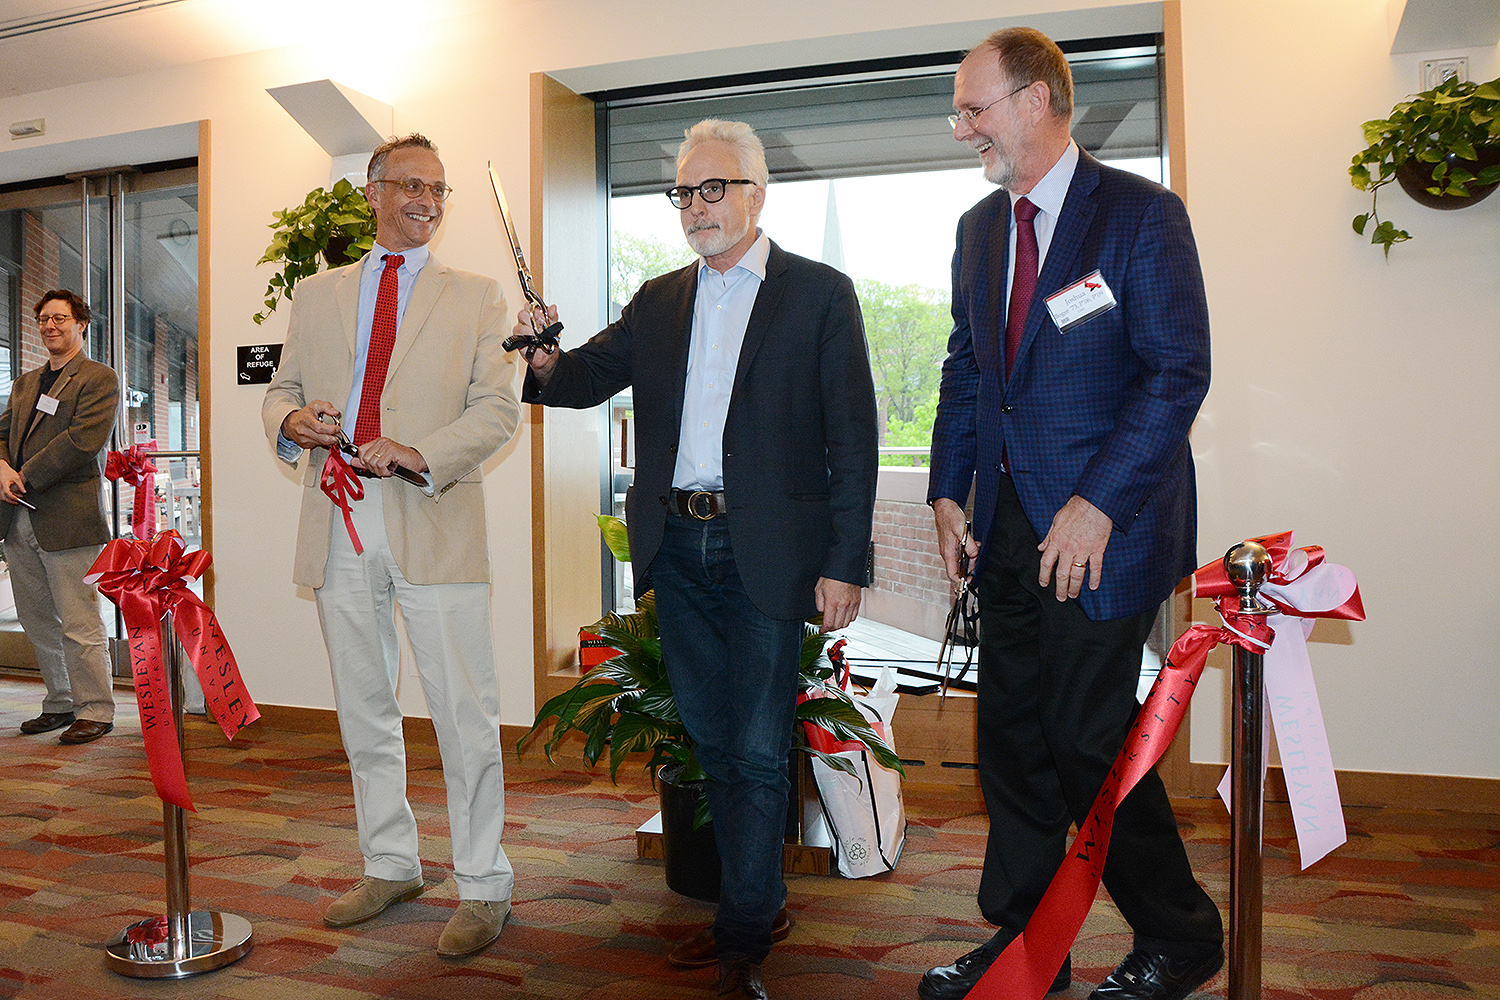 Members of the Class of 1981 and special guests joined together on May 21 to dedicate the West Wing of Usdan University Center in honor of Bradley Whitford ’81. (Photo by John Van Vlack)